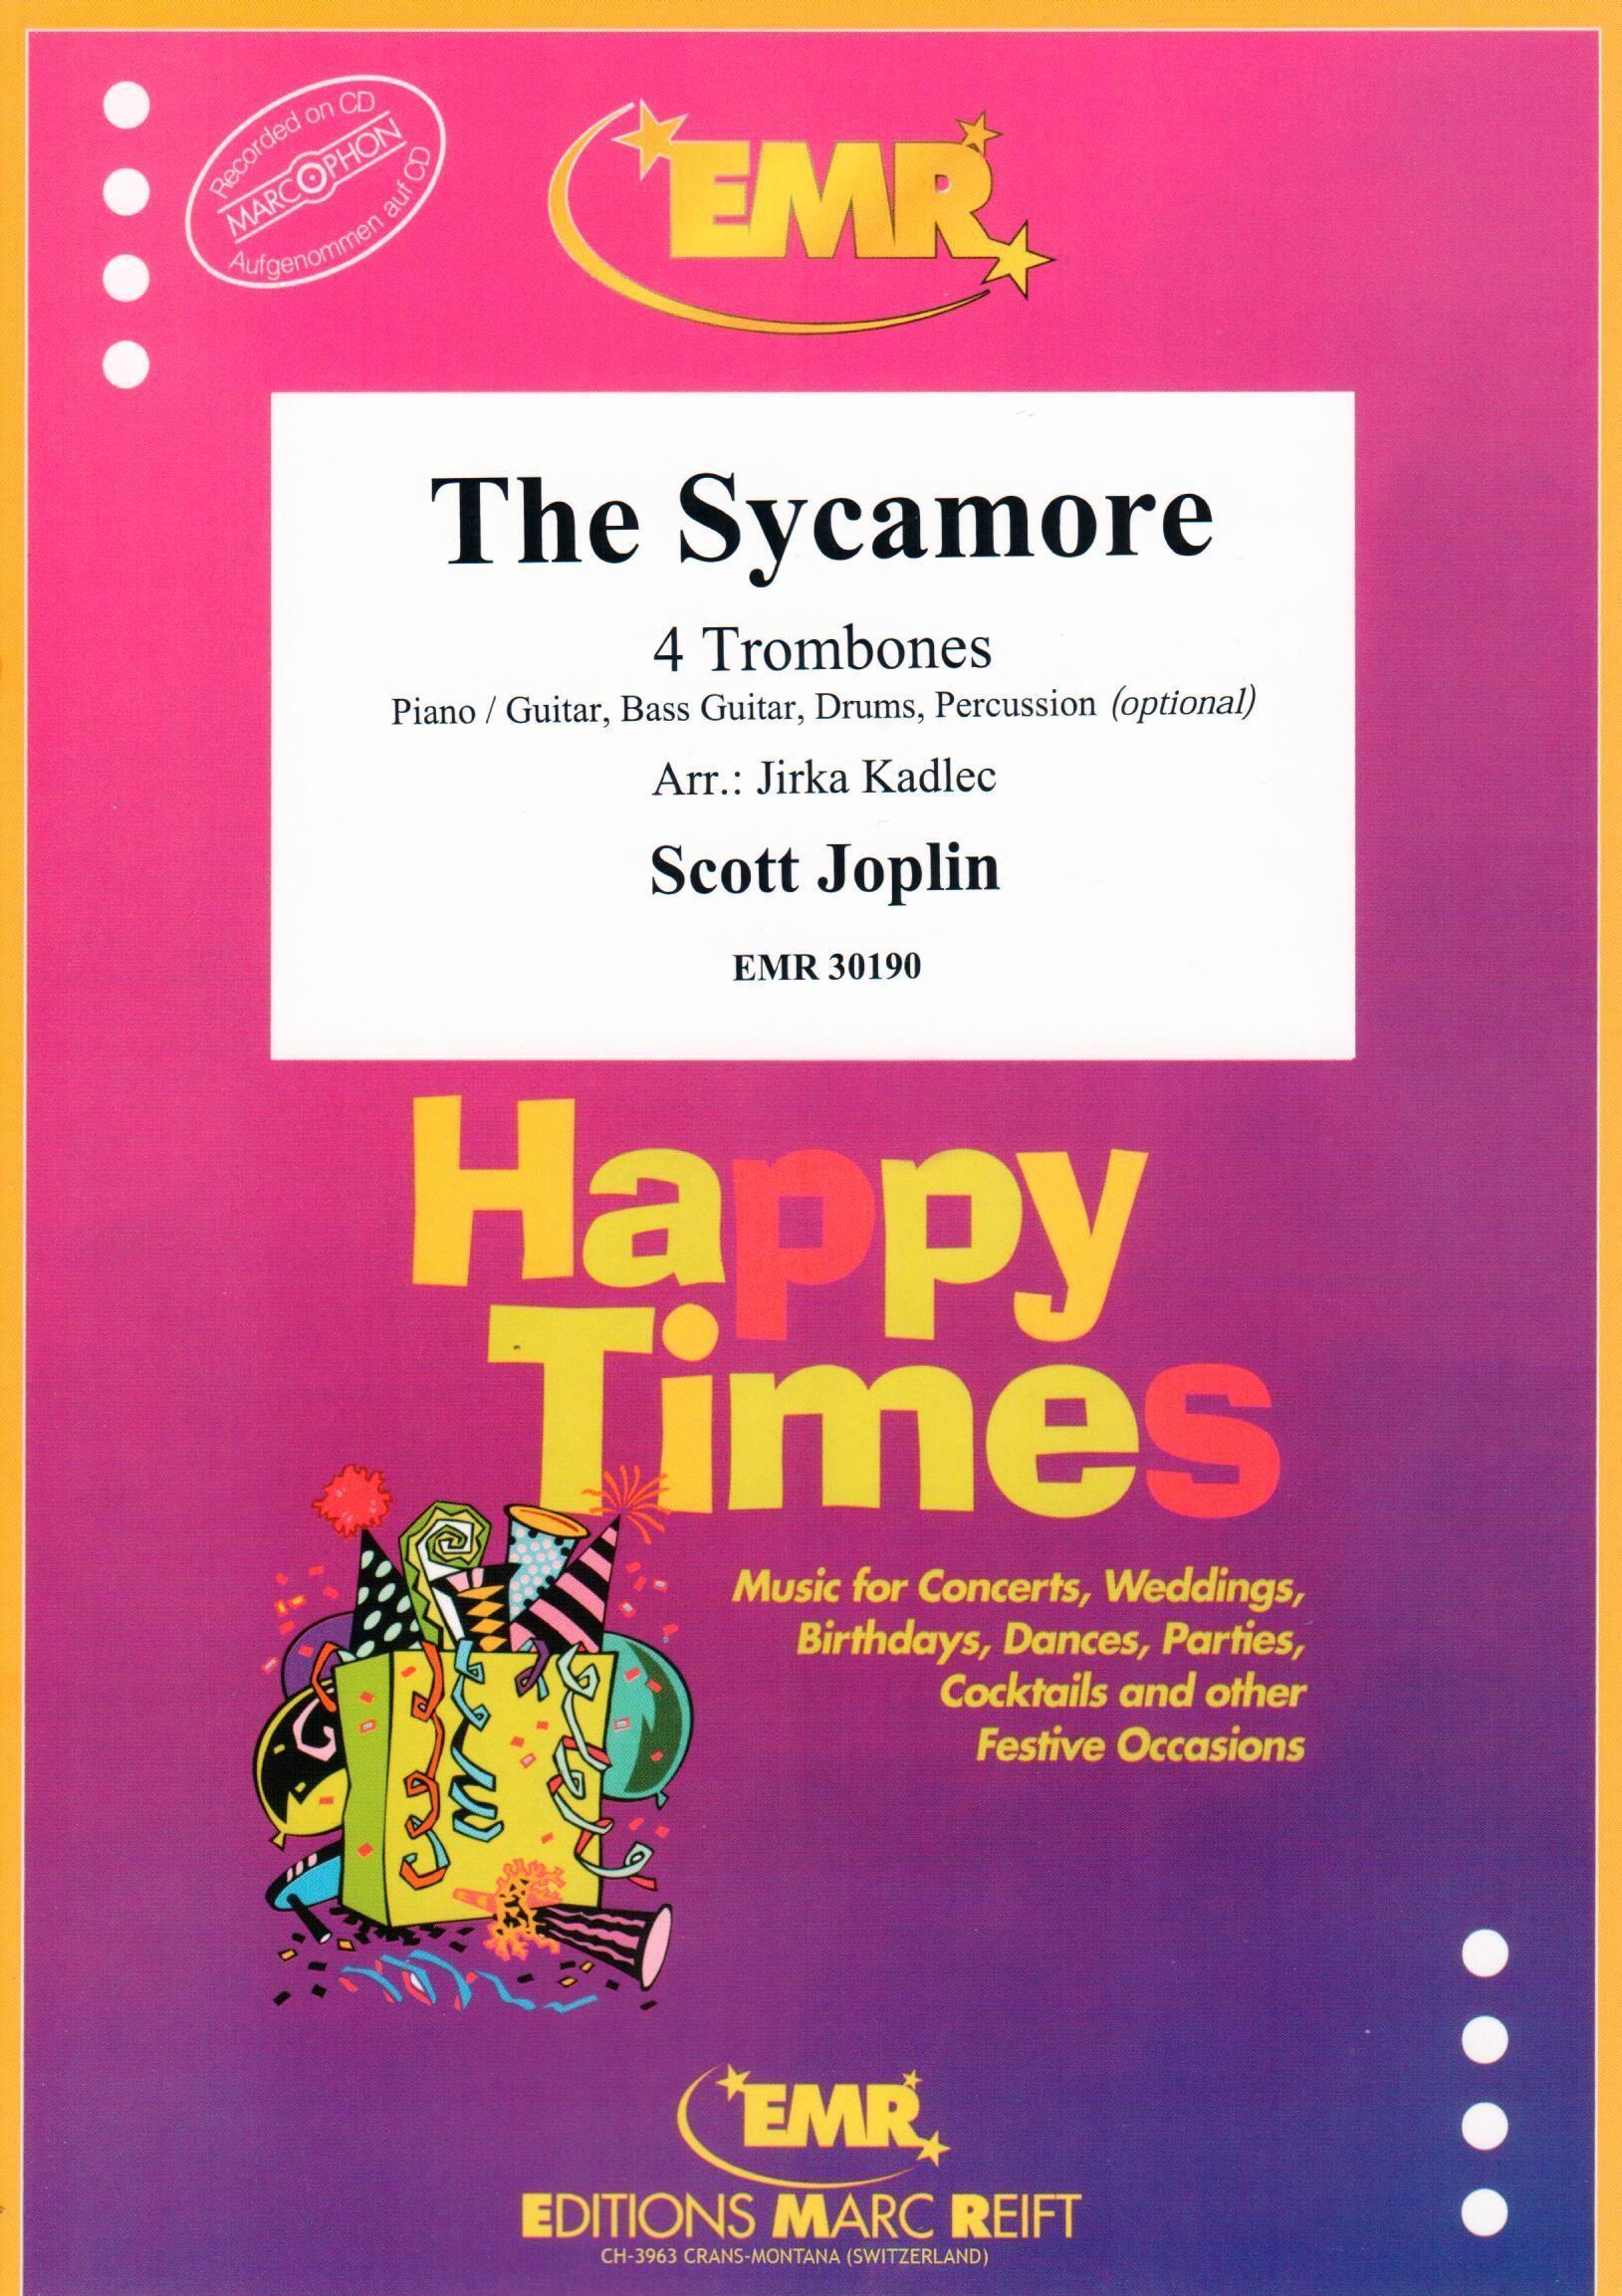 THE SYNCAMORE, SOLOS - Trombone